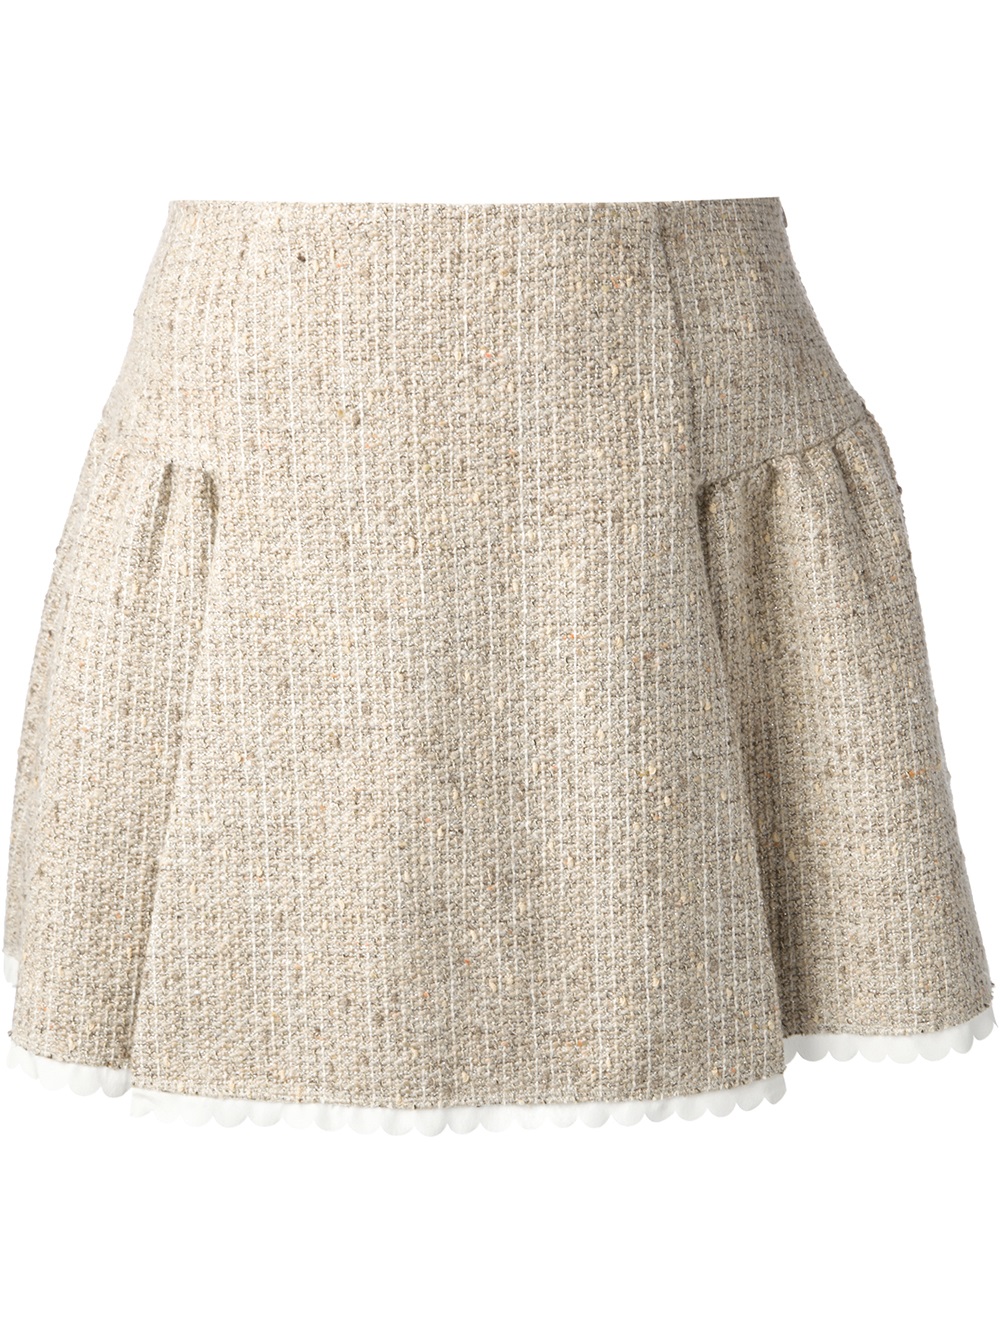 RED Valentino Tweed Mini Skirt in White | Lyst